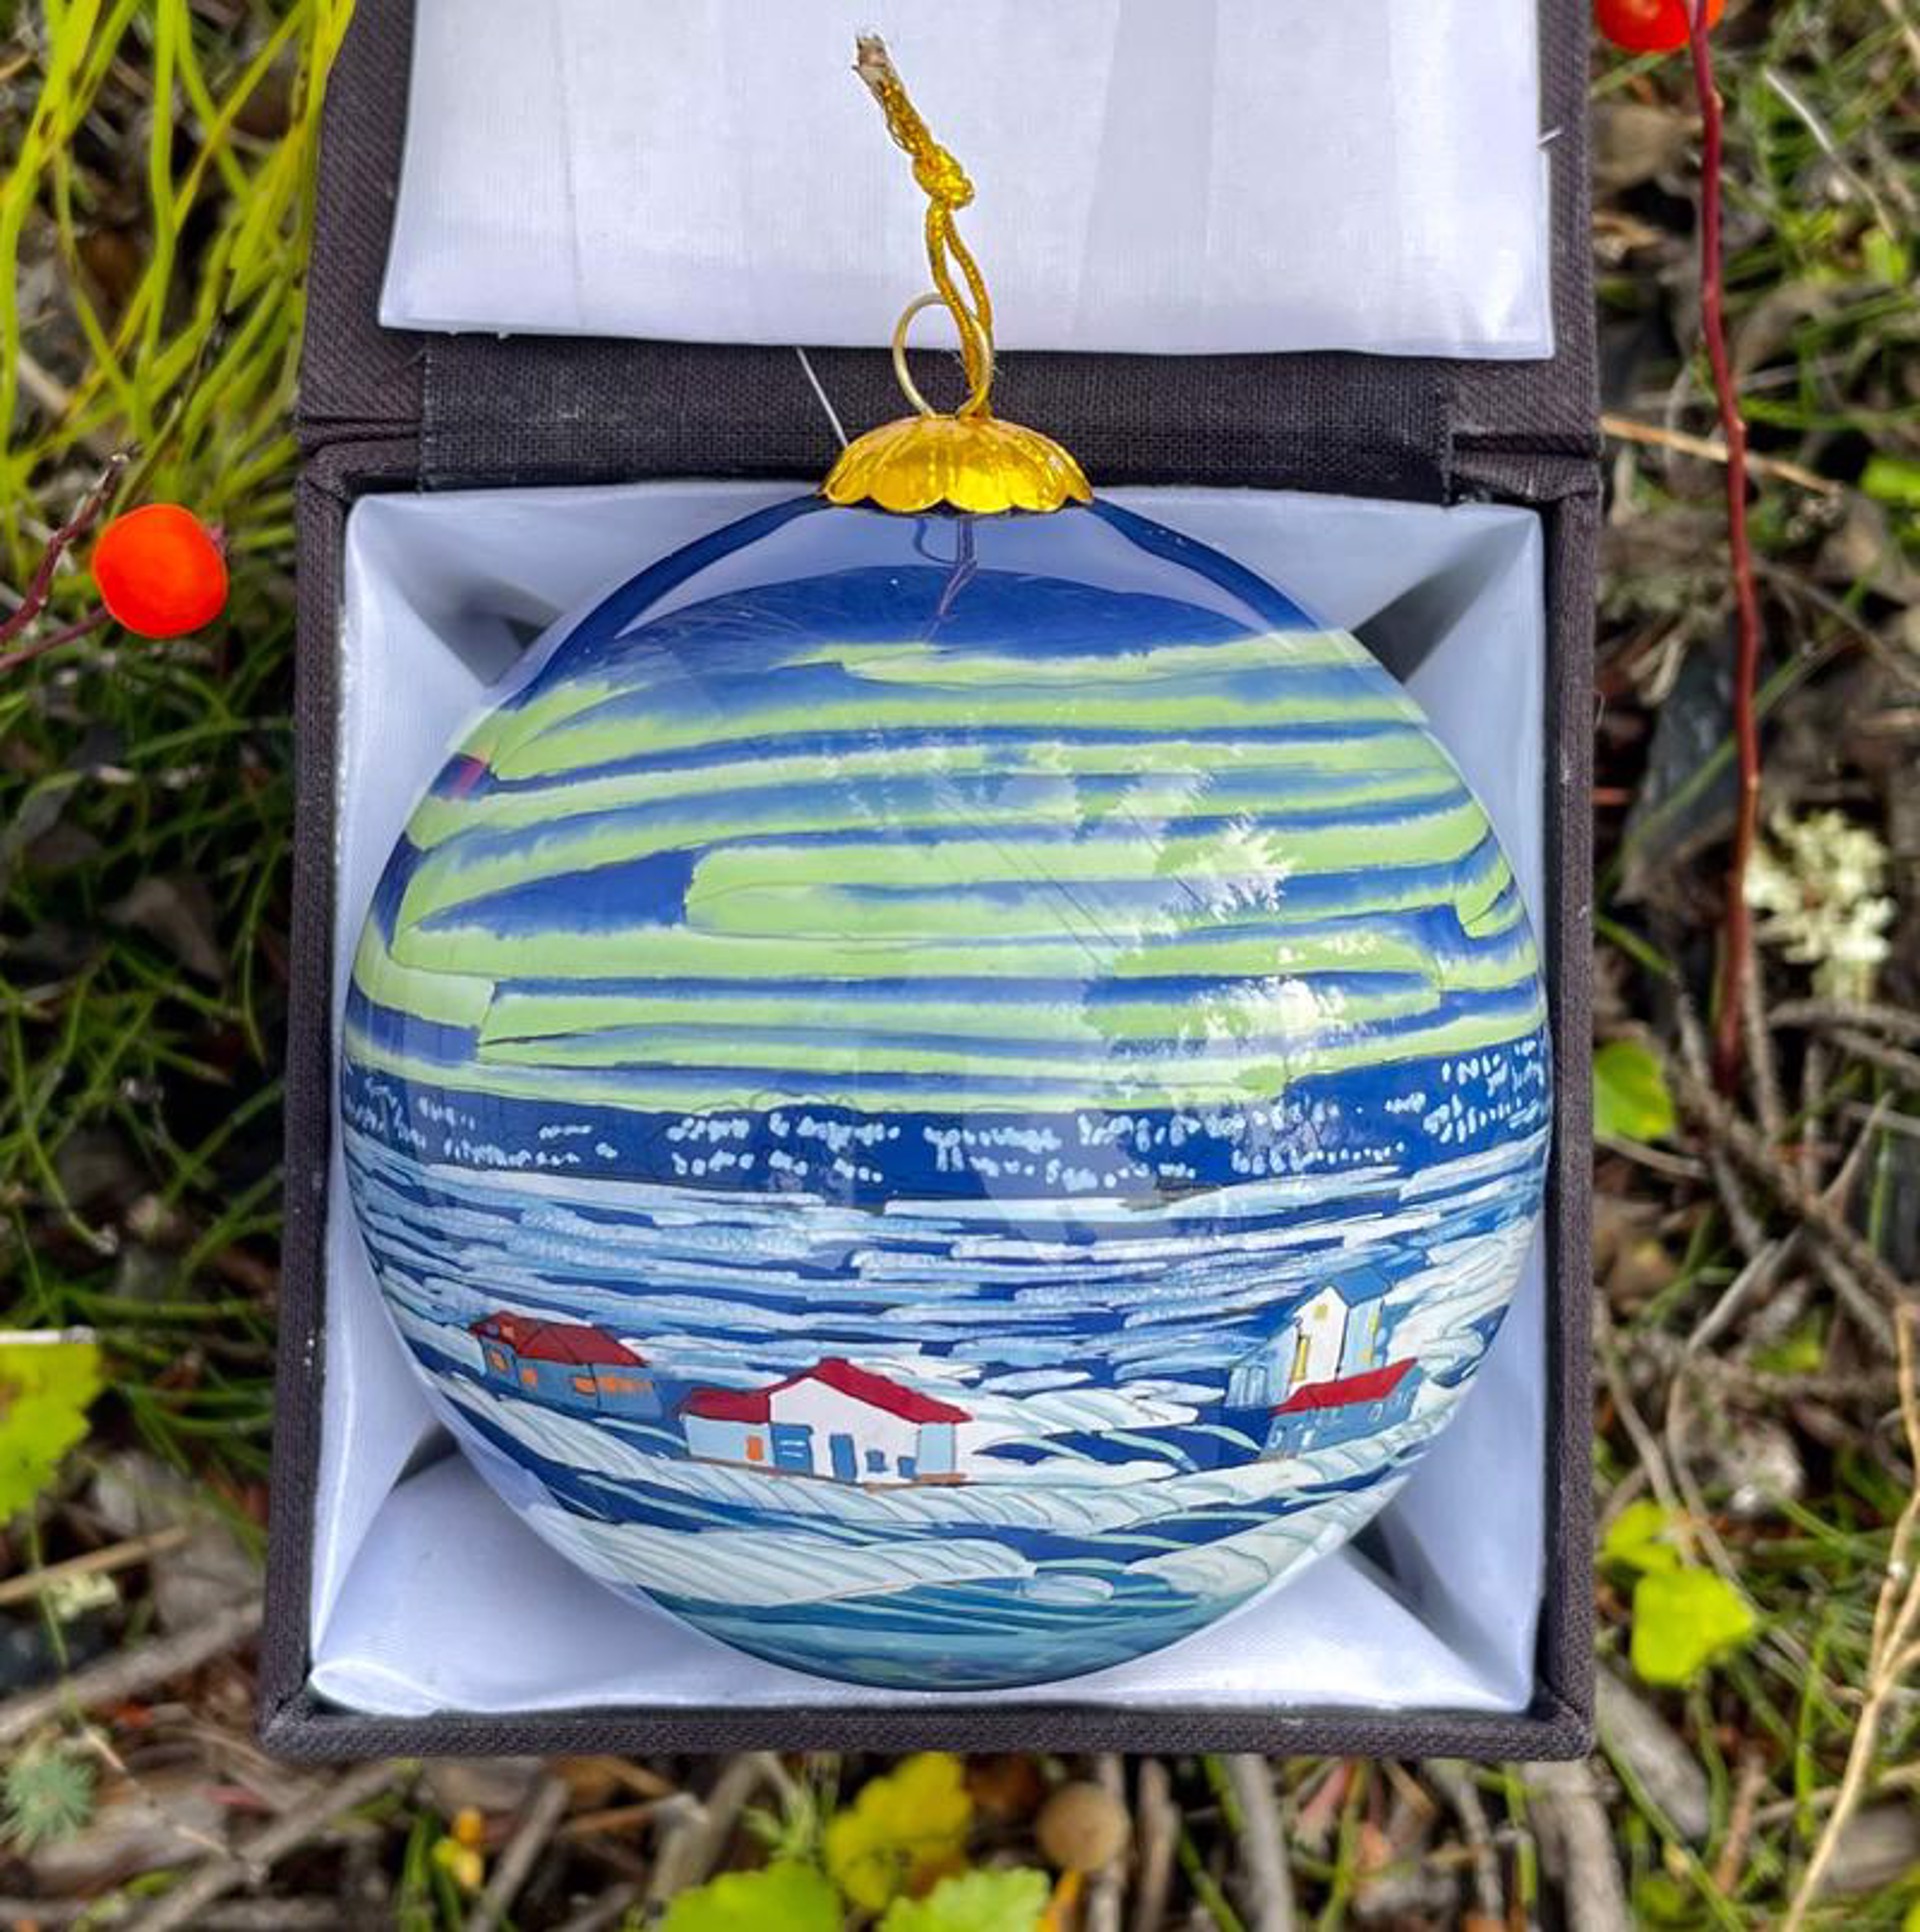 Yellowknife Houseboats Ornaments by Robbie Craig